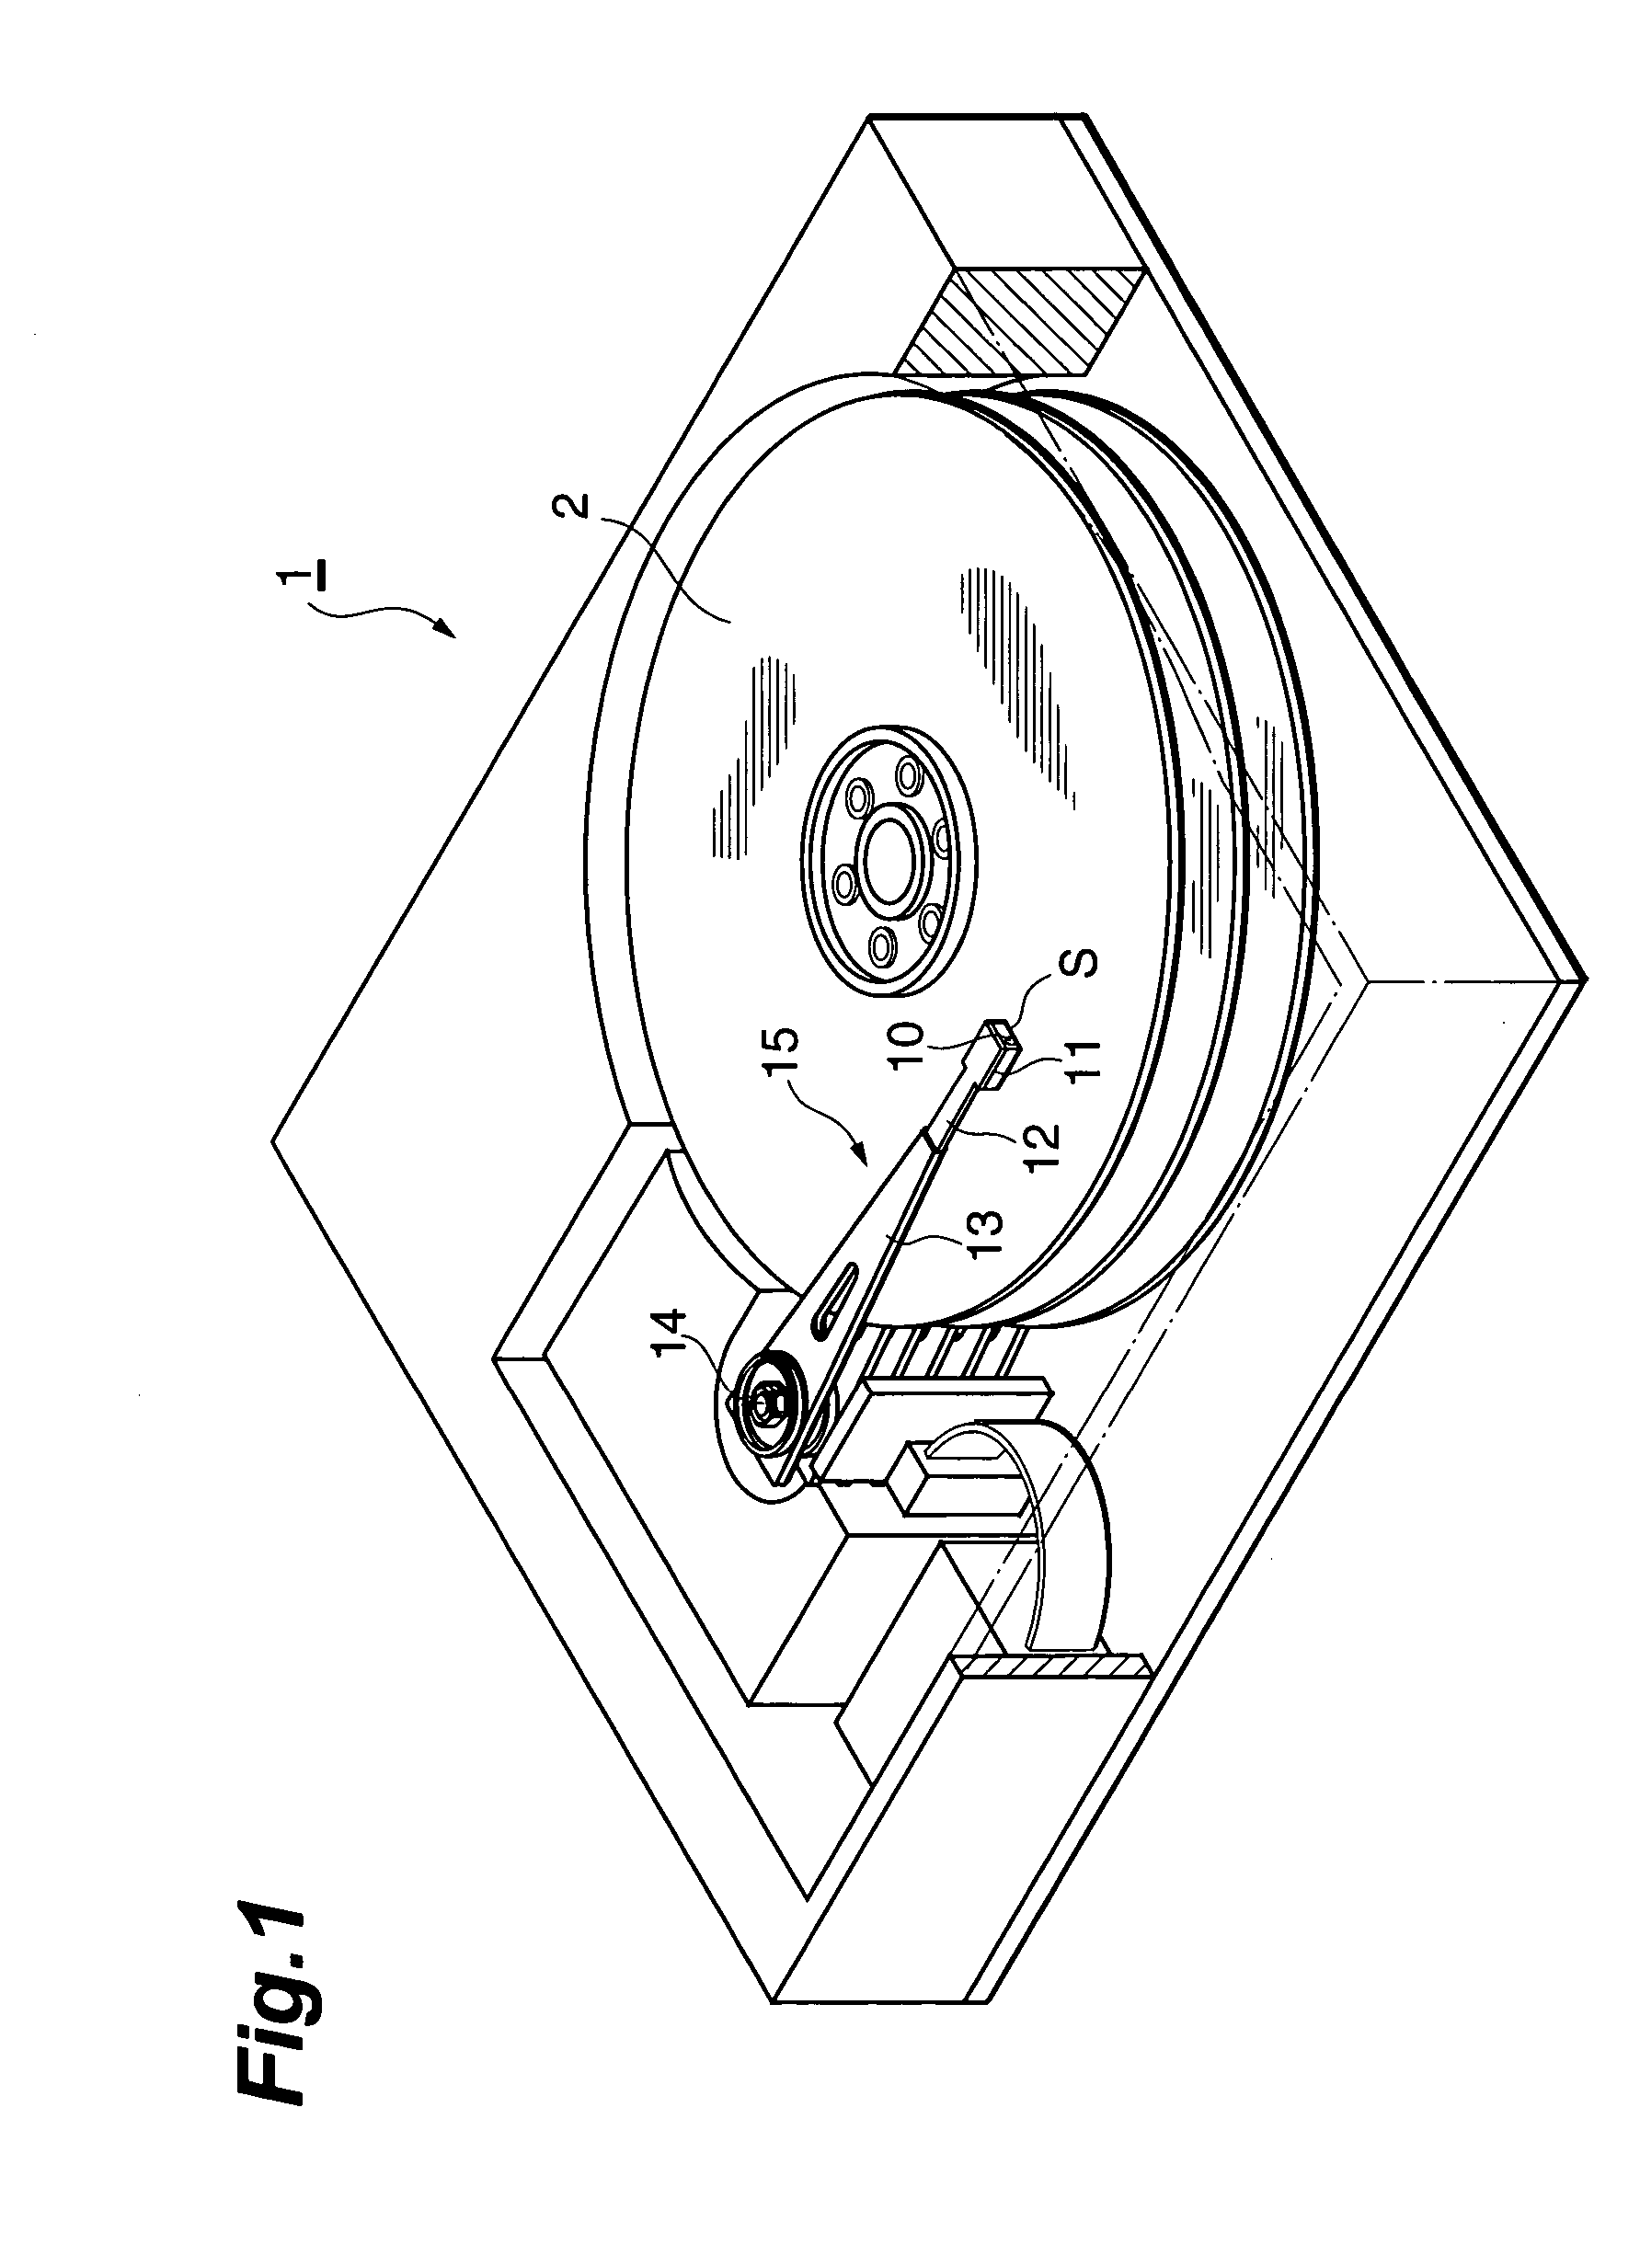 Thin-film magnetic head, head gimbal assembly, and hard disk drive incorporating a heater